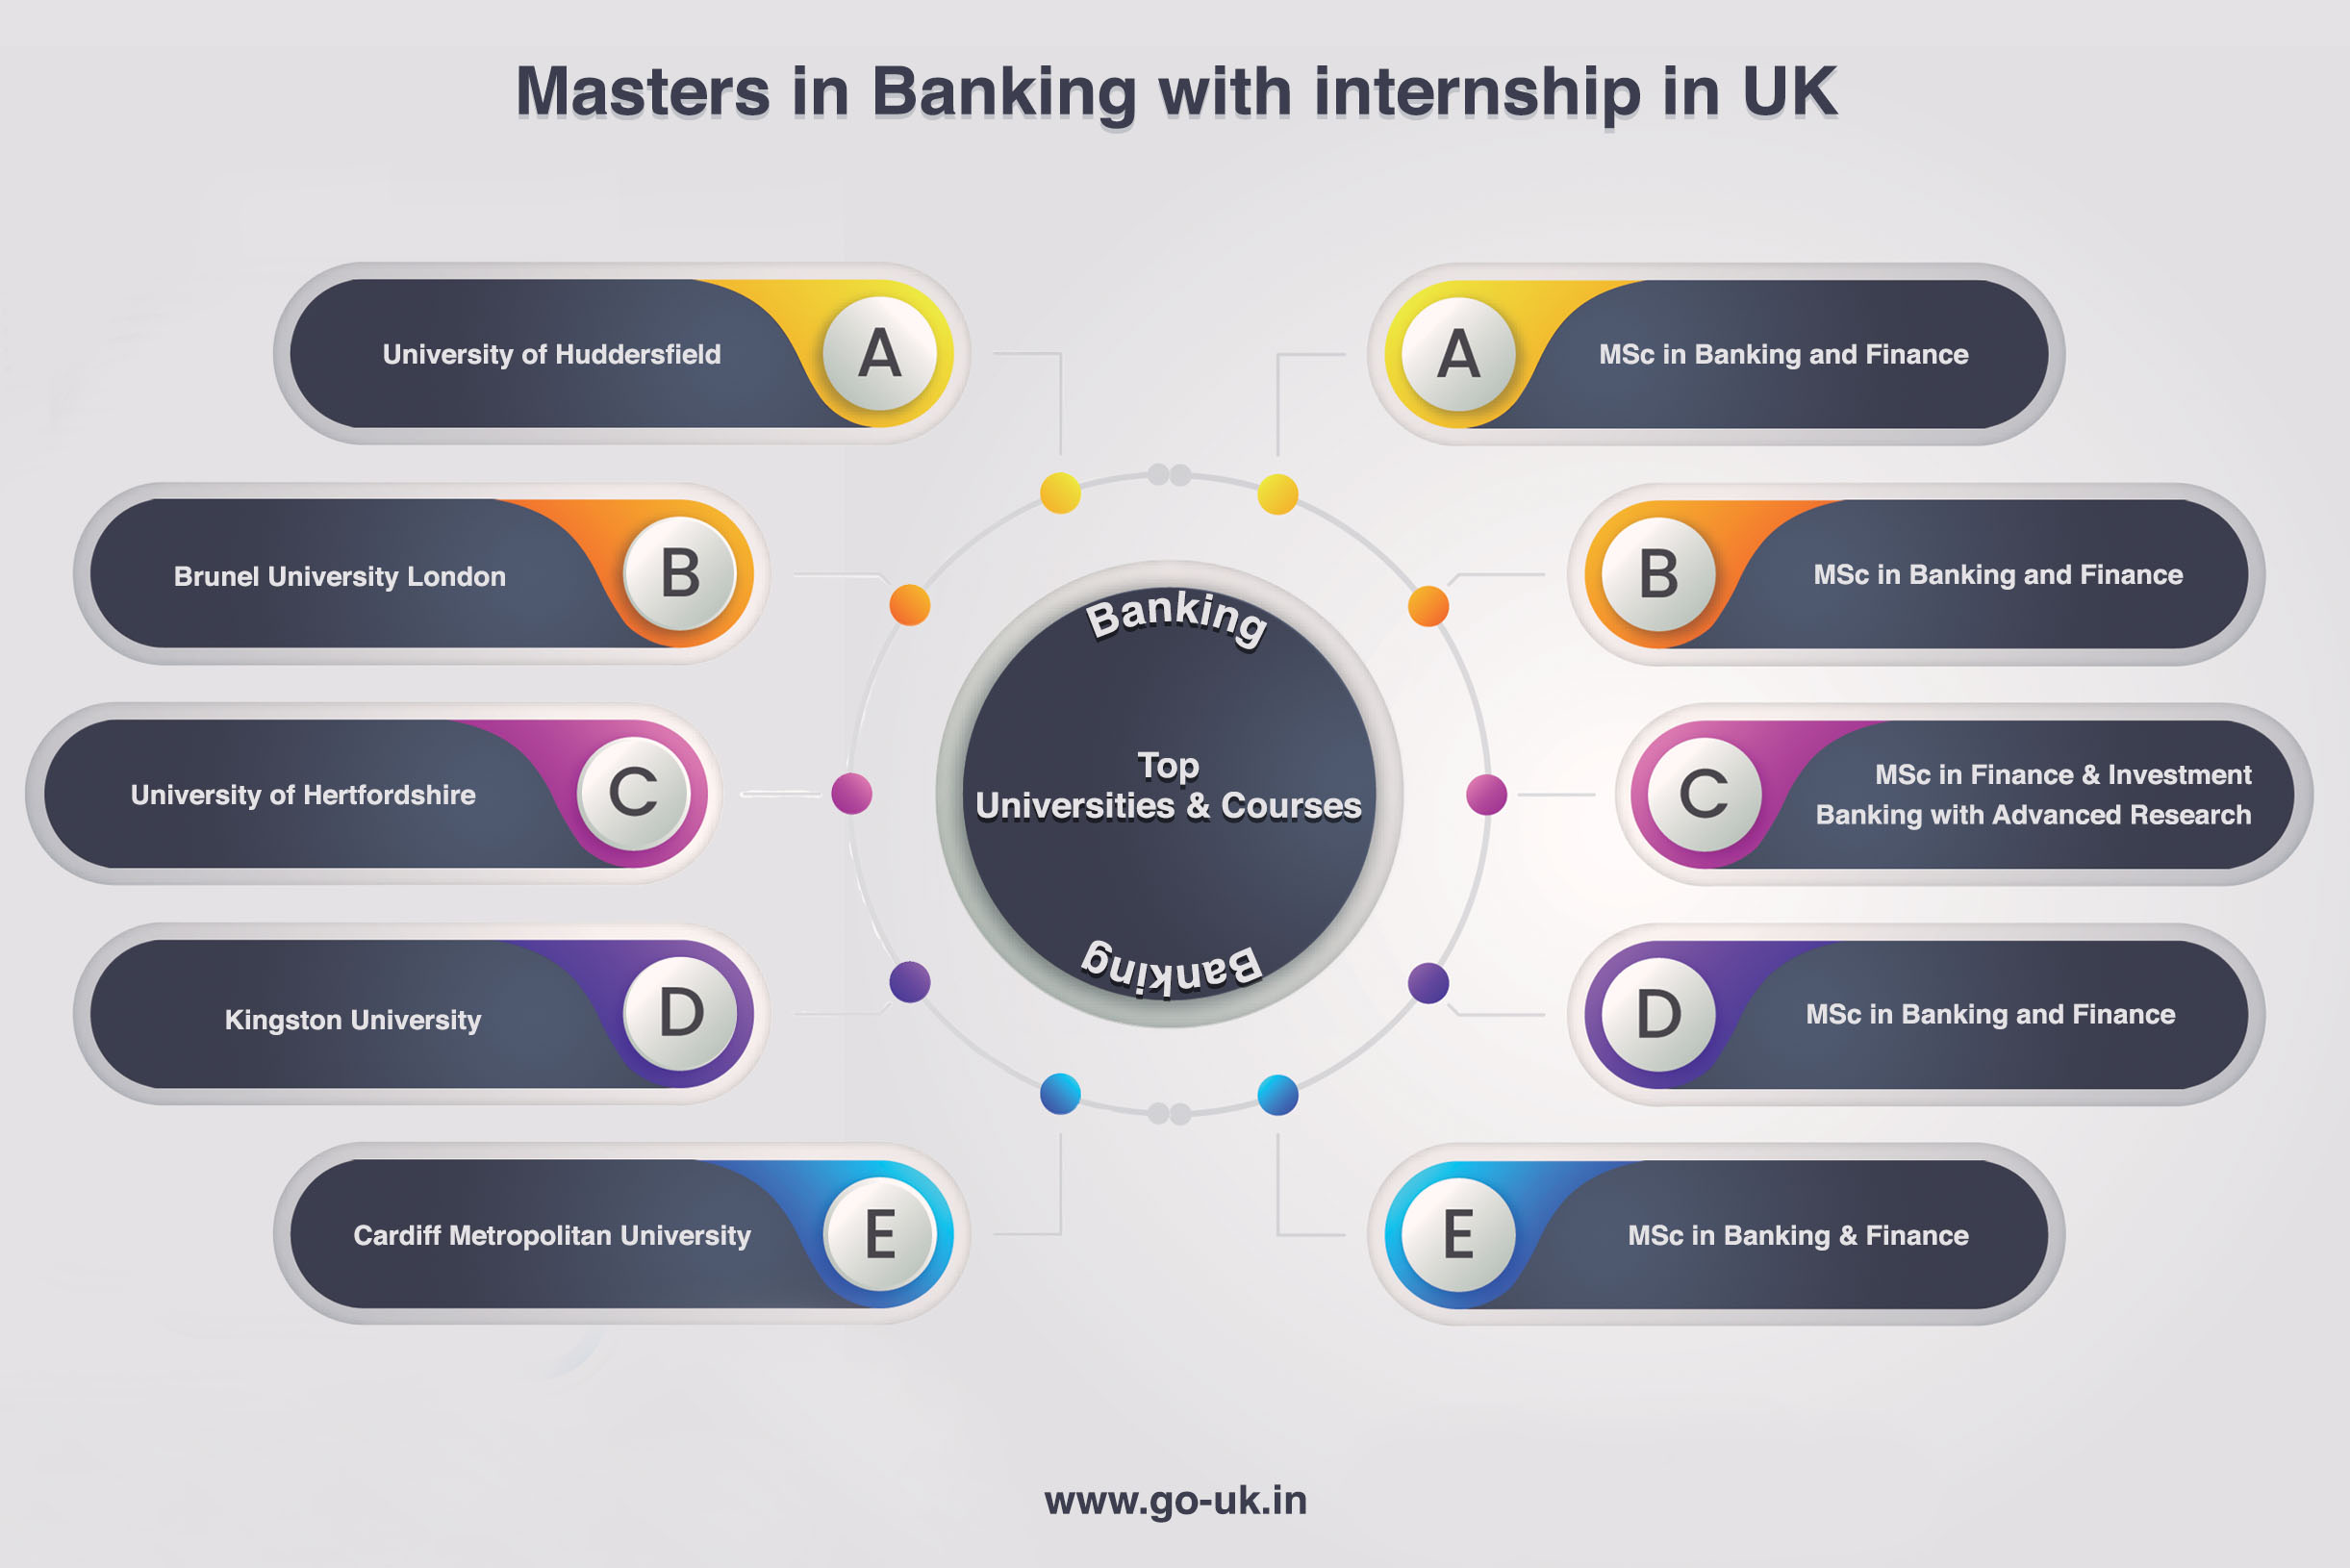 Masters in Banking with Internship in UK